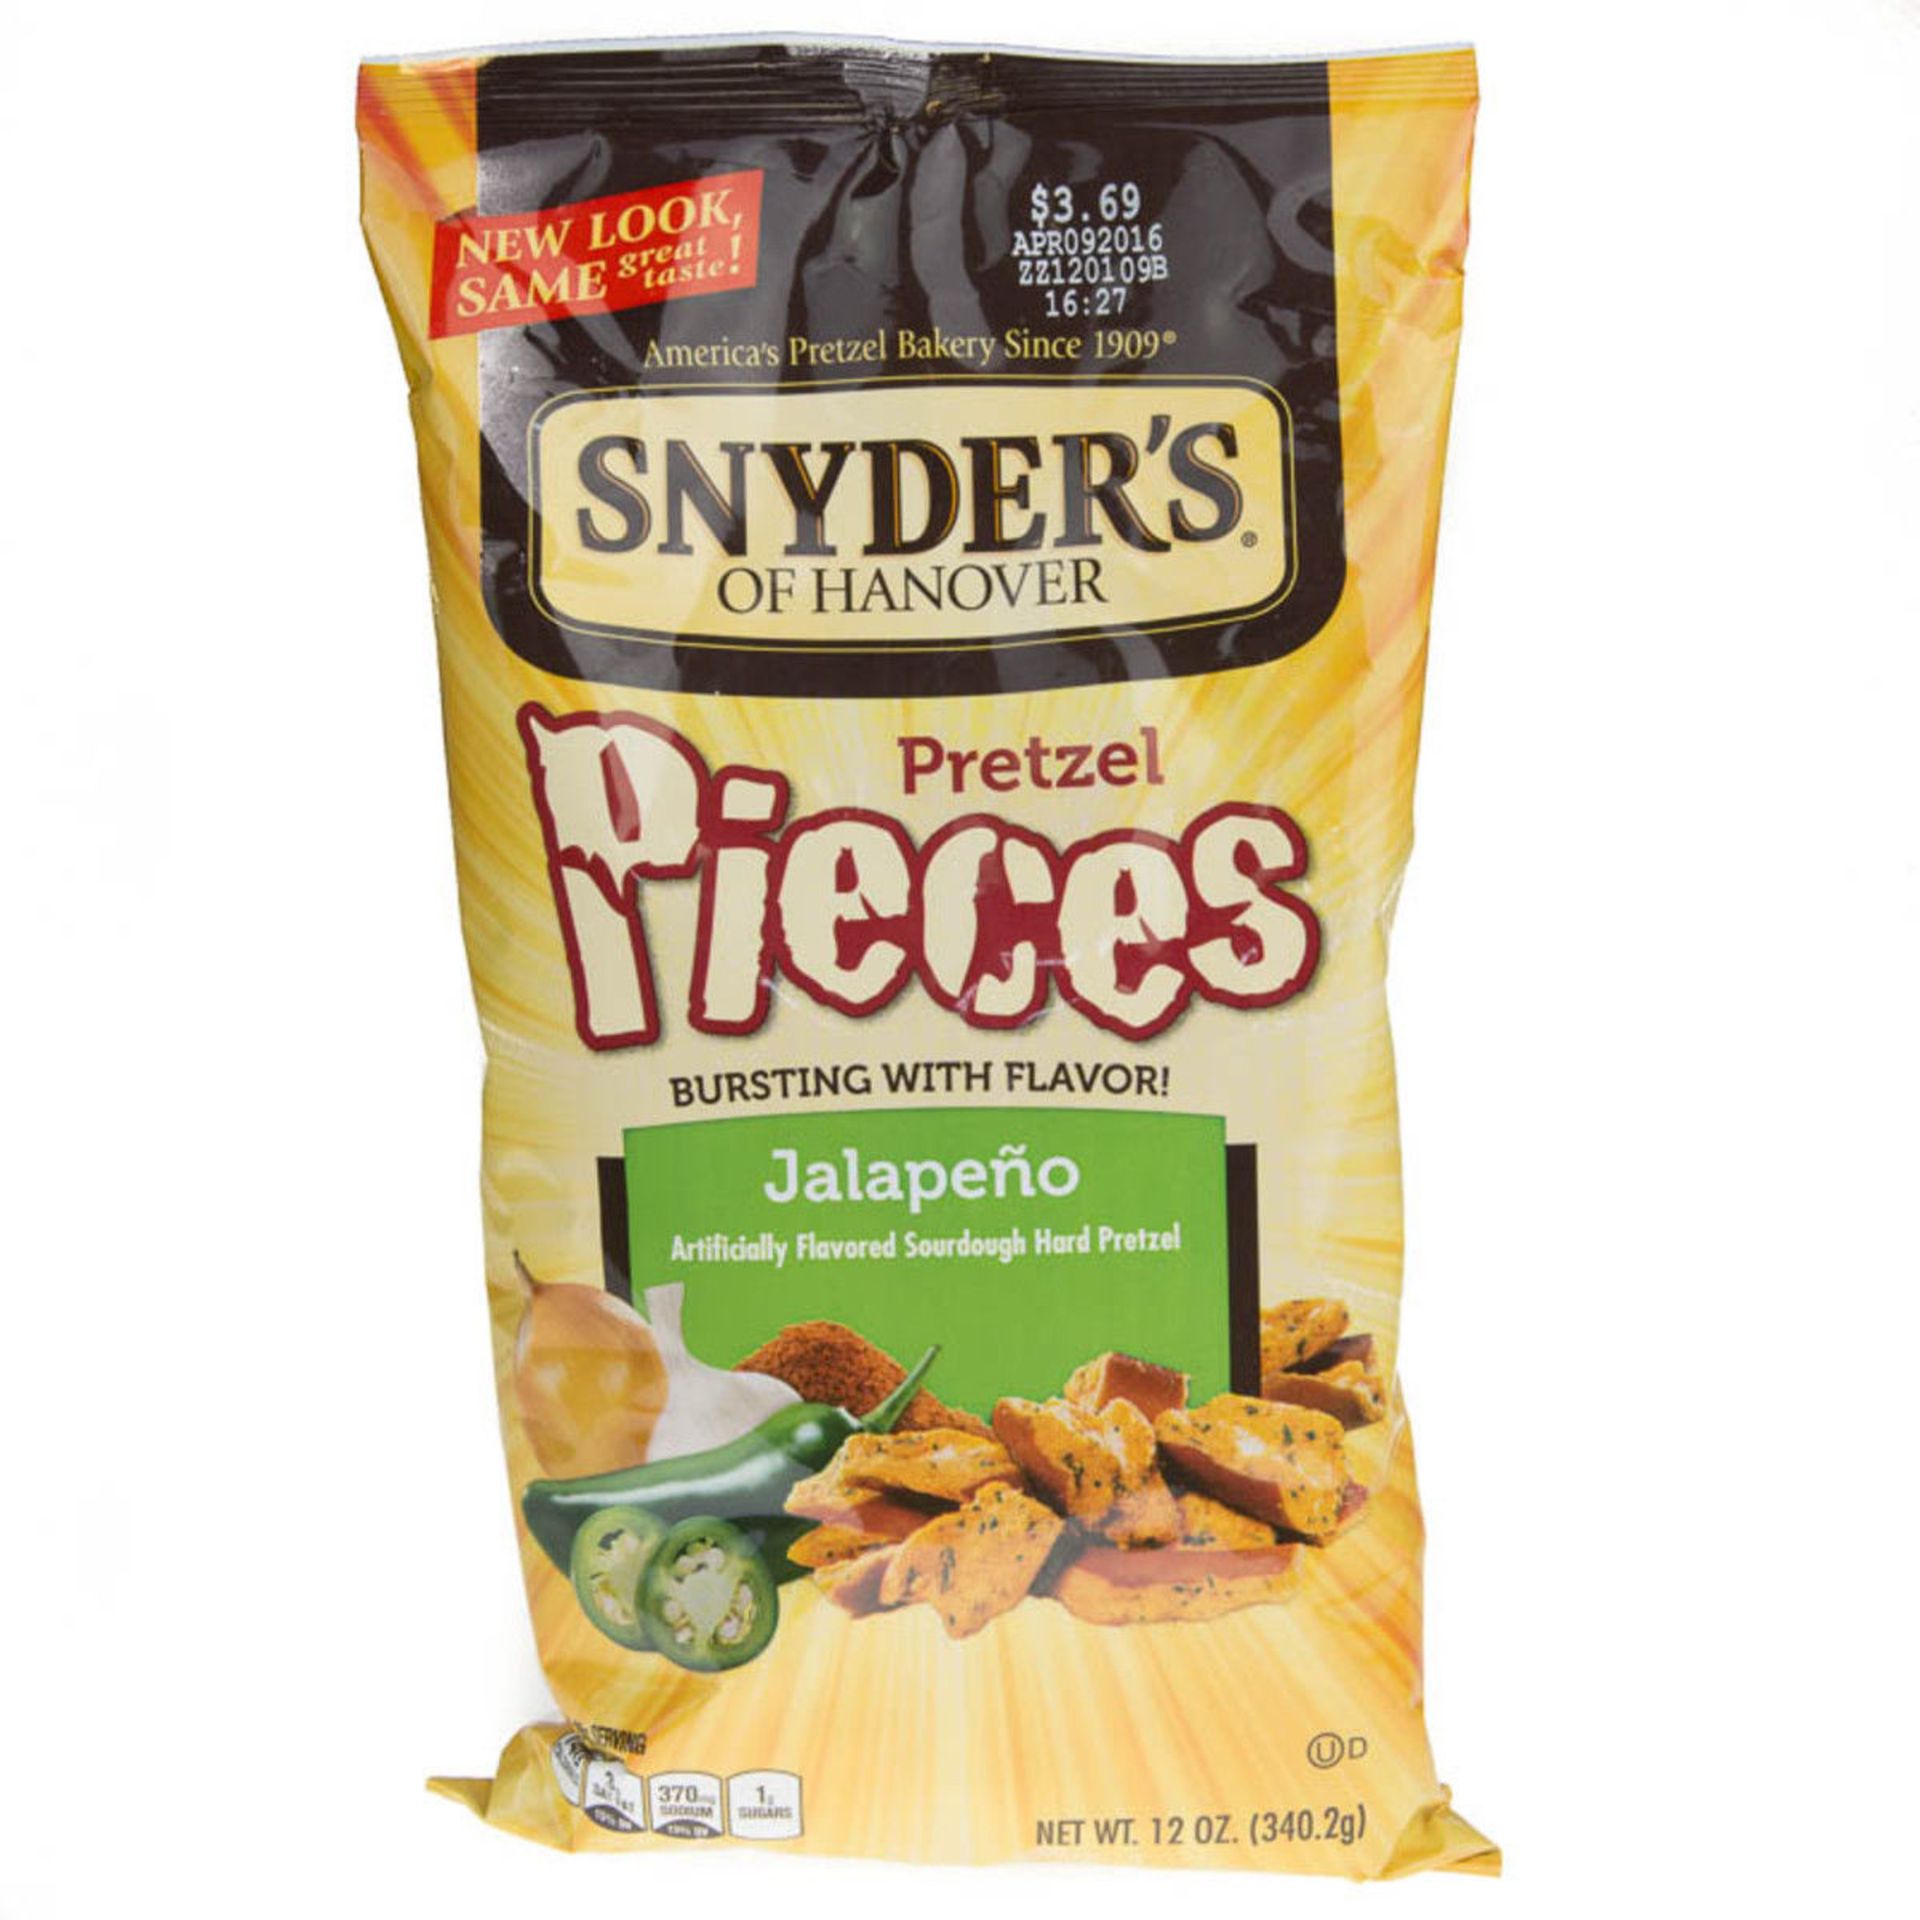 LOT OF 75 Bags OF Snyders of Hanover Pretzel Pieces, Jalapeño